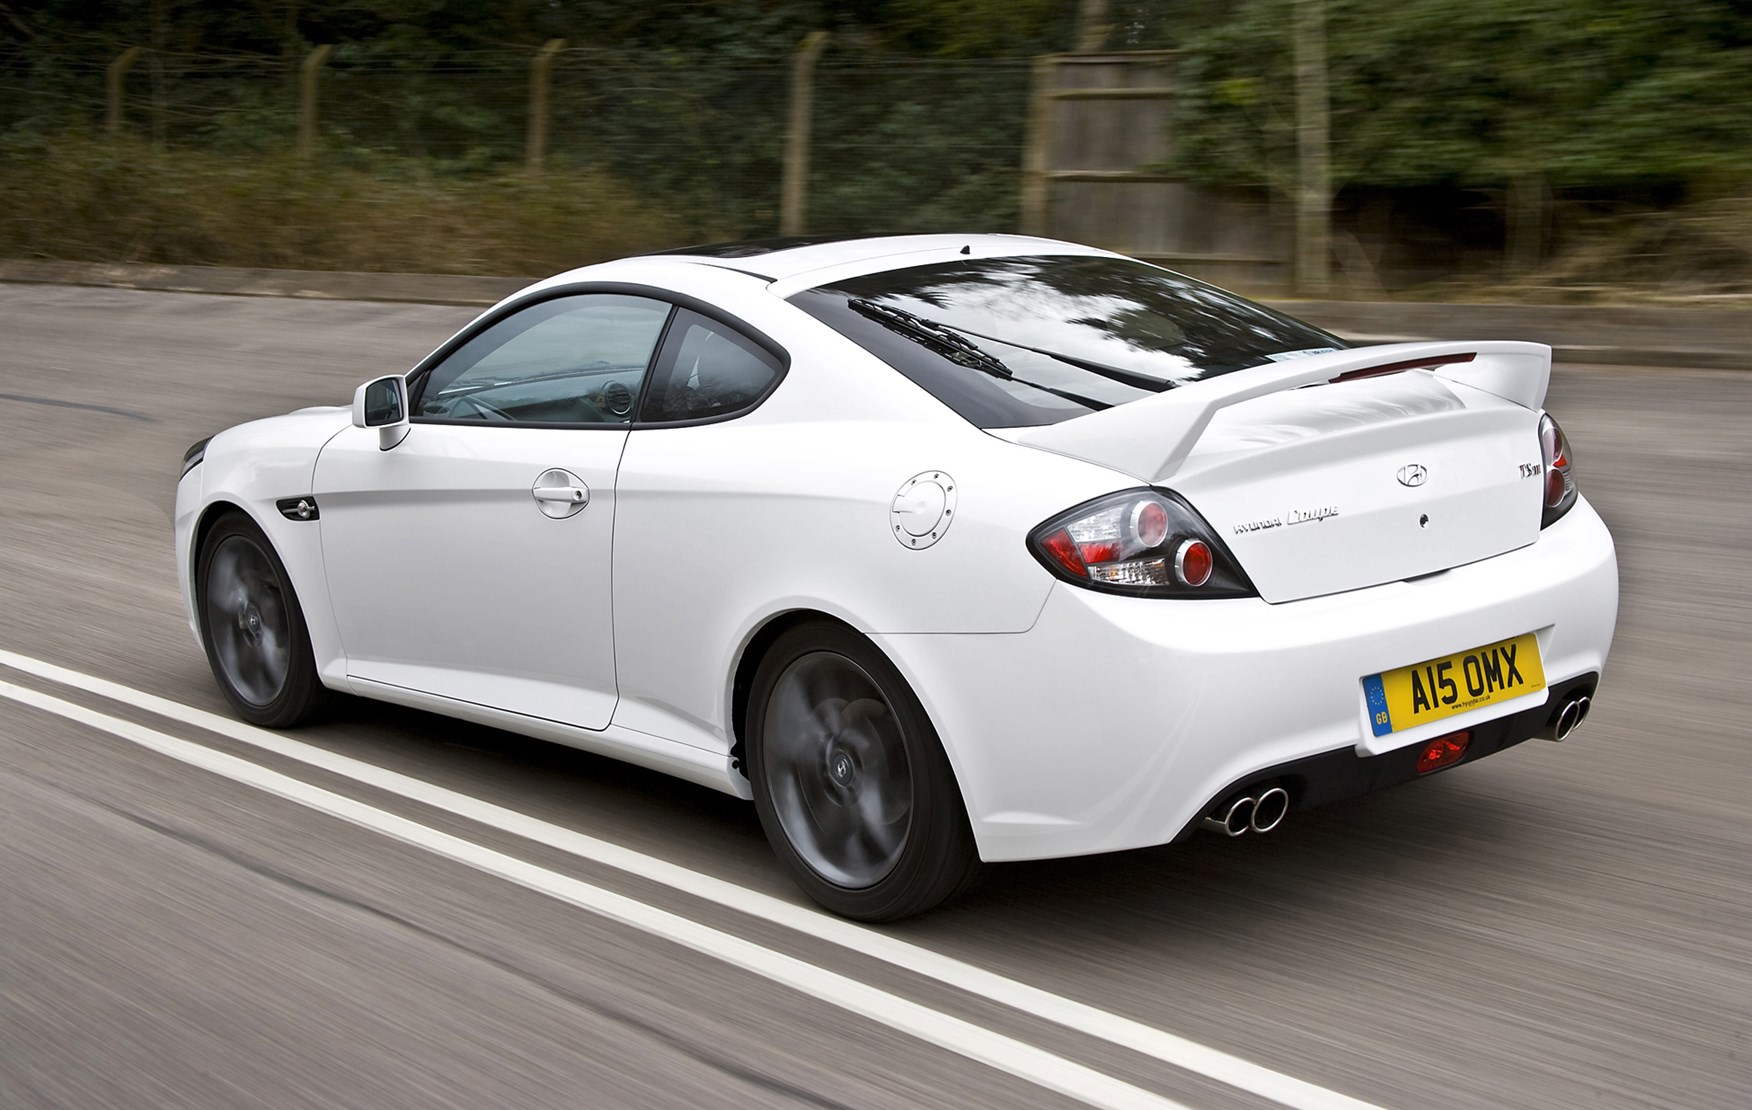 Hyundai Coupe Backgrounds on Wallpapers Vista